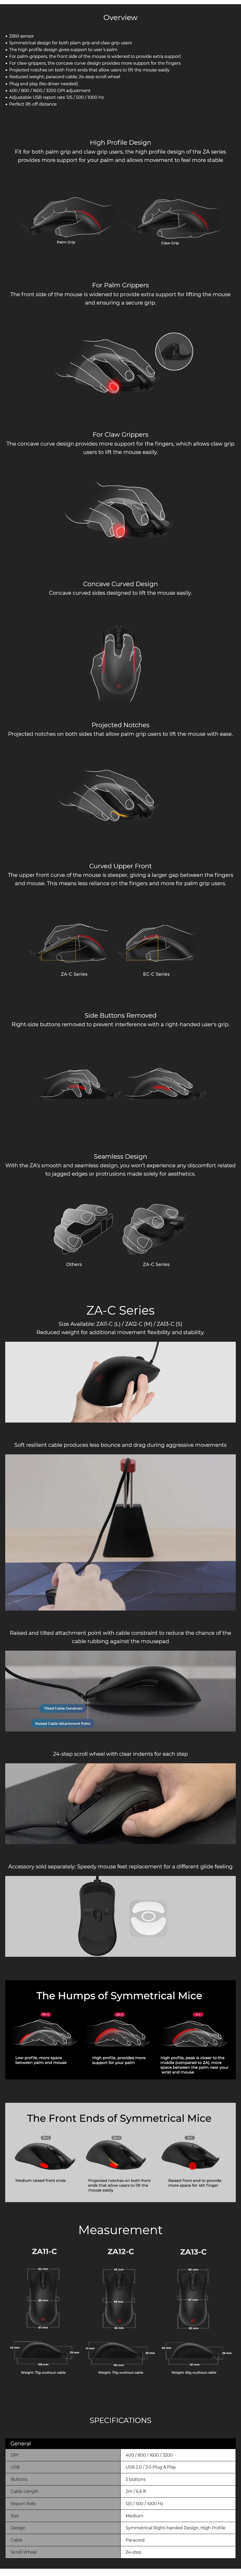 A large marketing image providing additional information about the product BenQ ZOWIE ZA12-C Esports Gaming Mouse - Additional alt info not provided